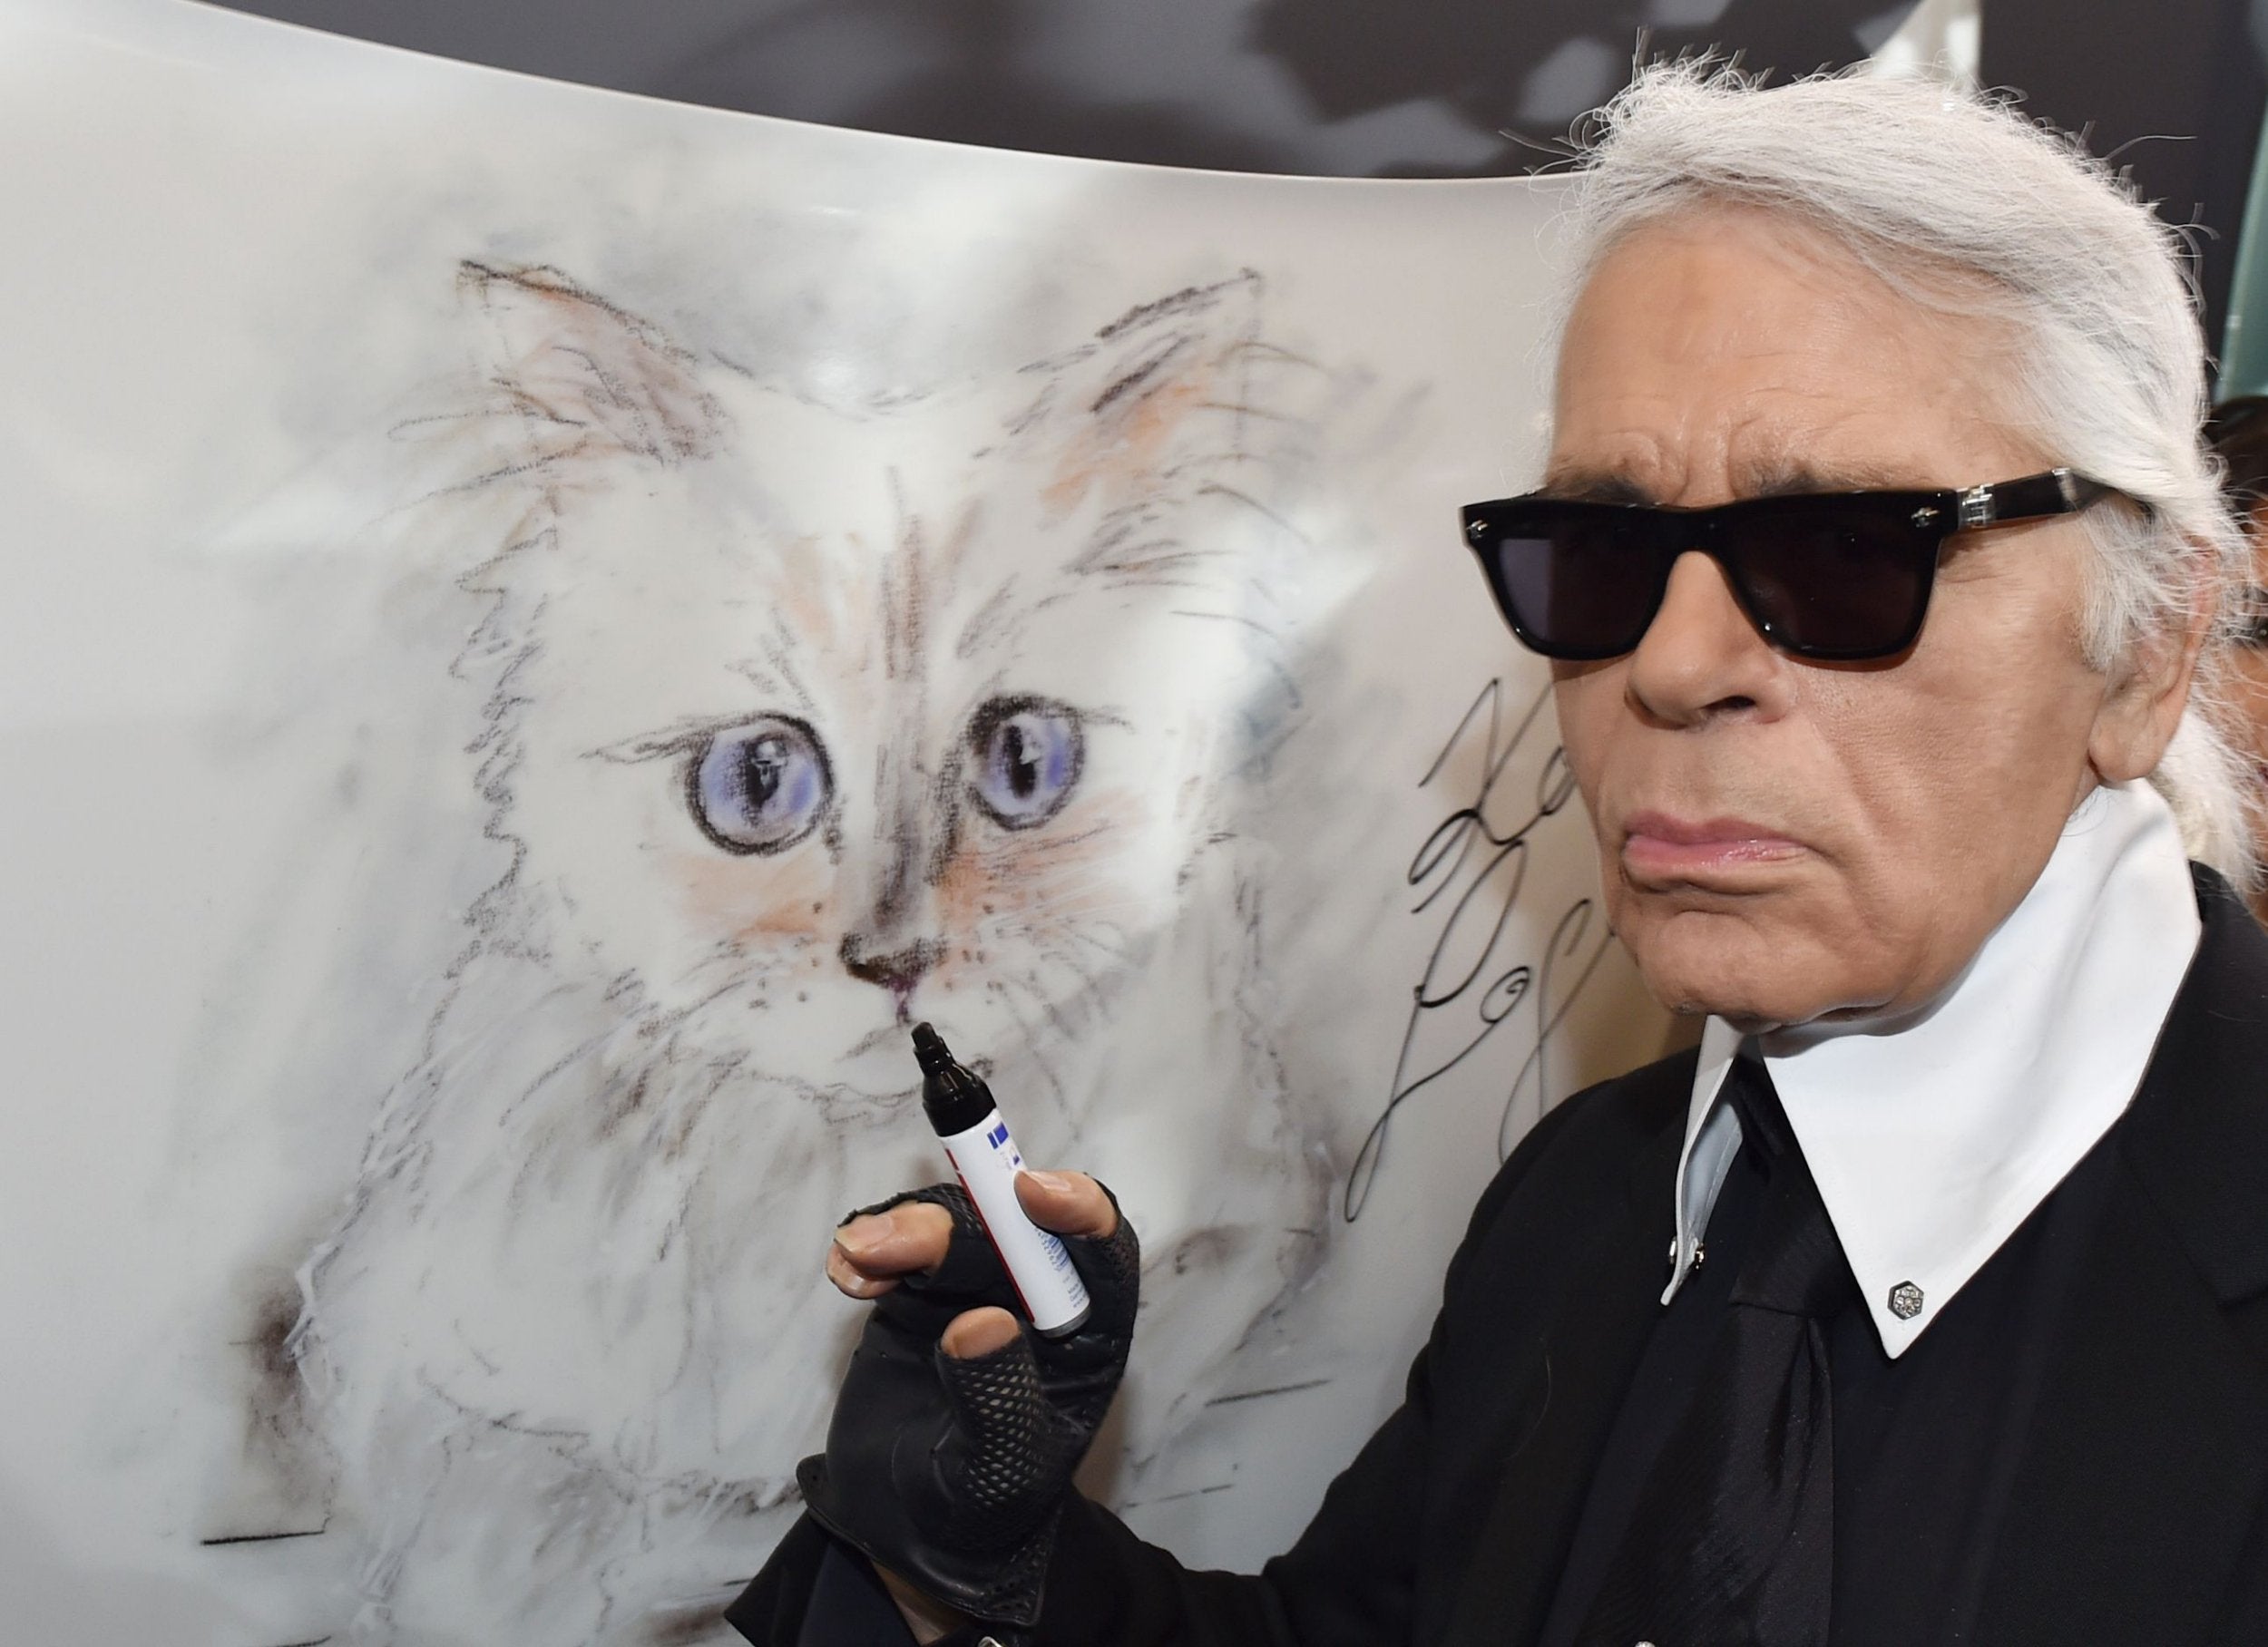 How can we celebrate the art of Karl Lagerfeld – who said such  controversial things? Here's how I do it, The Independent